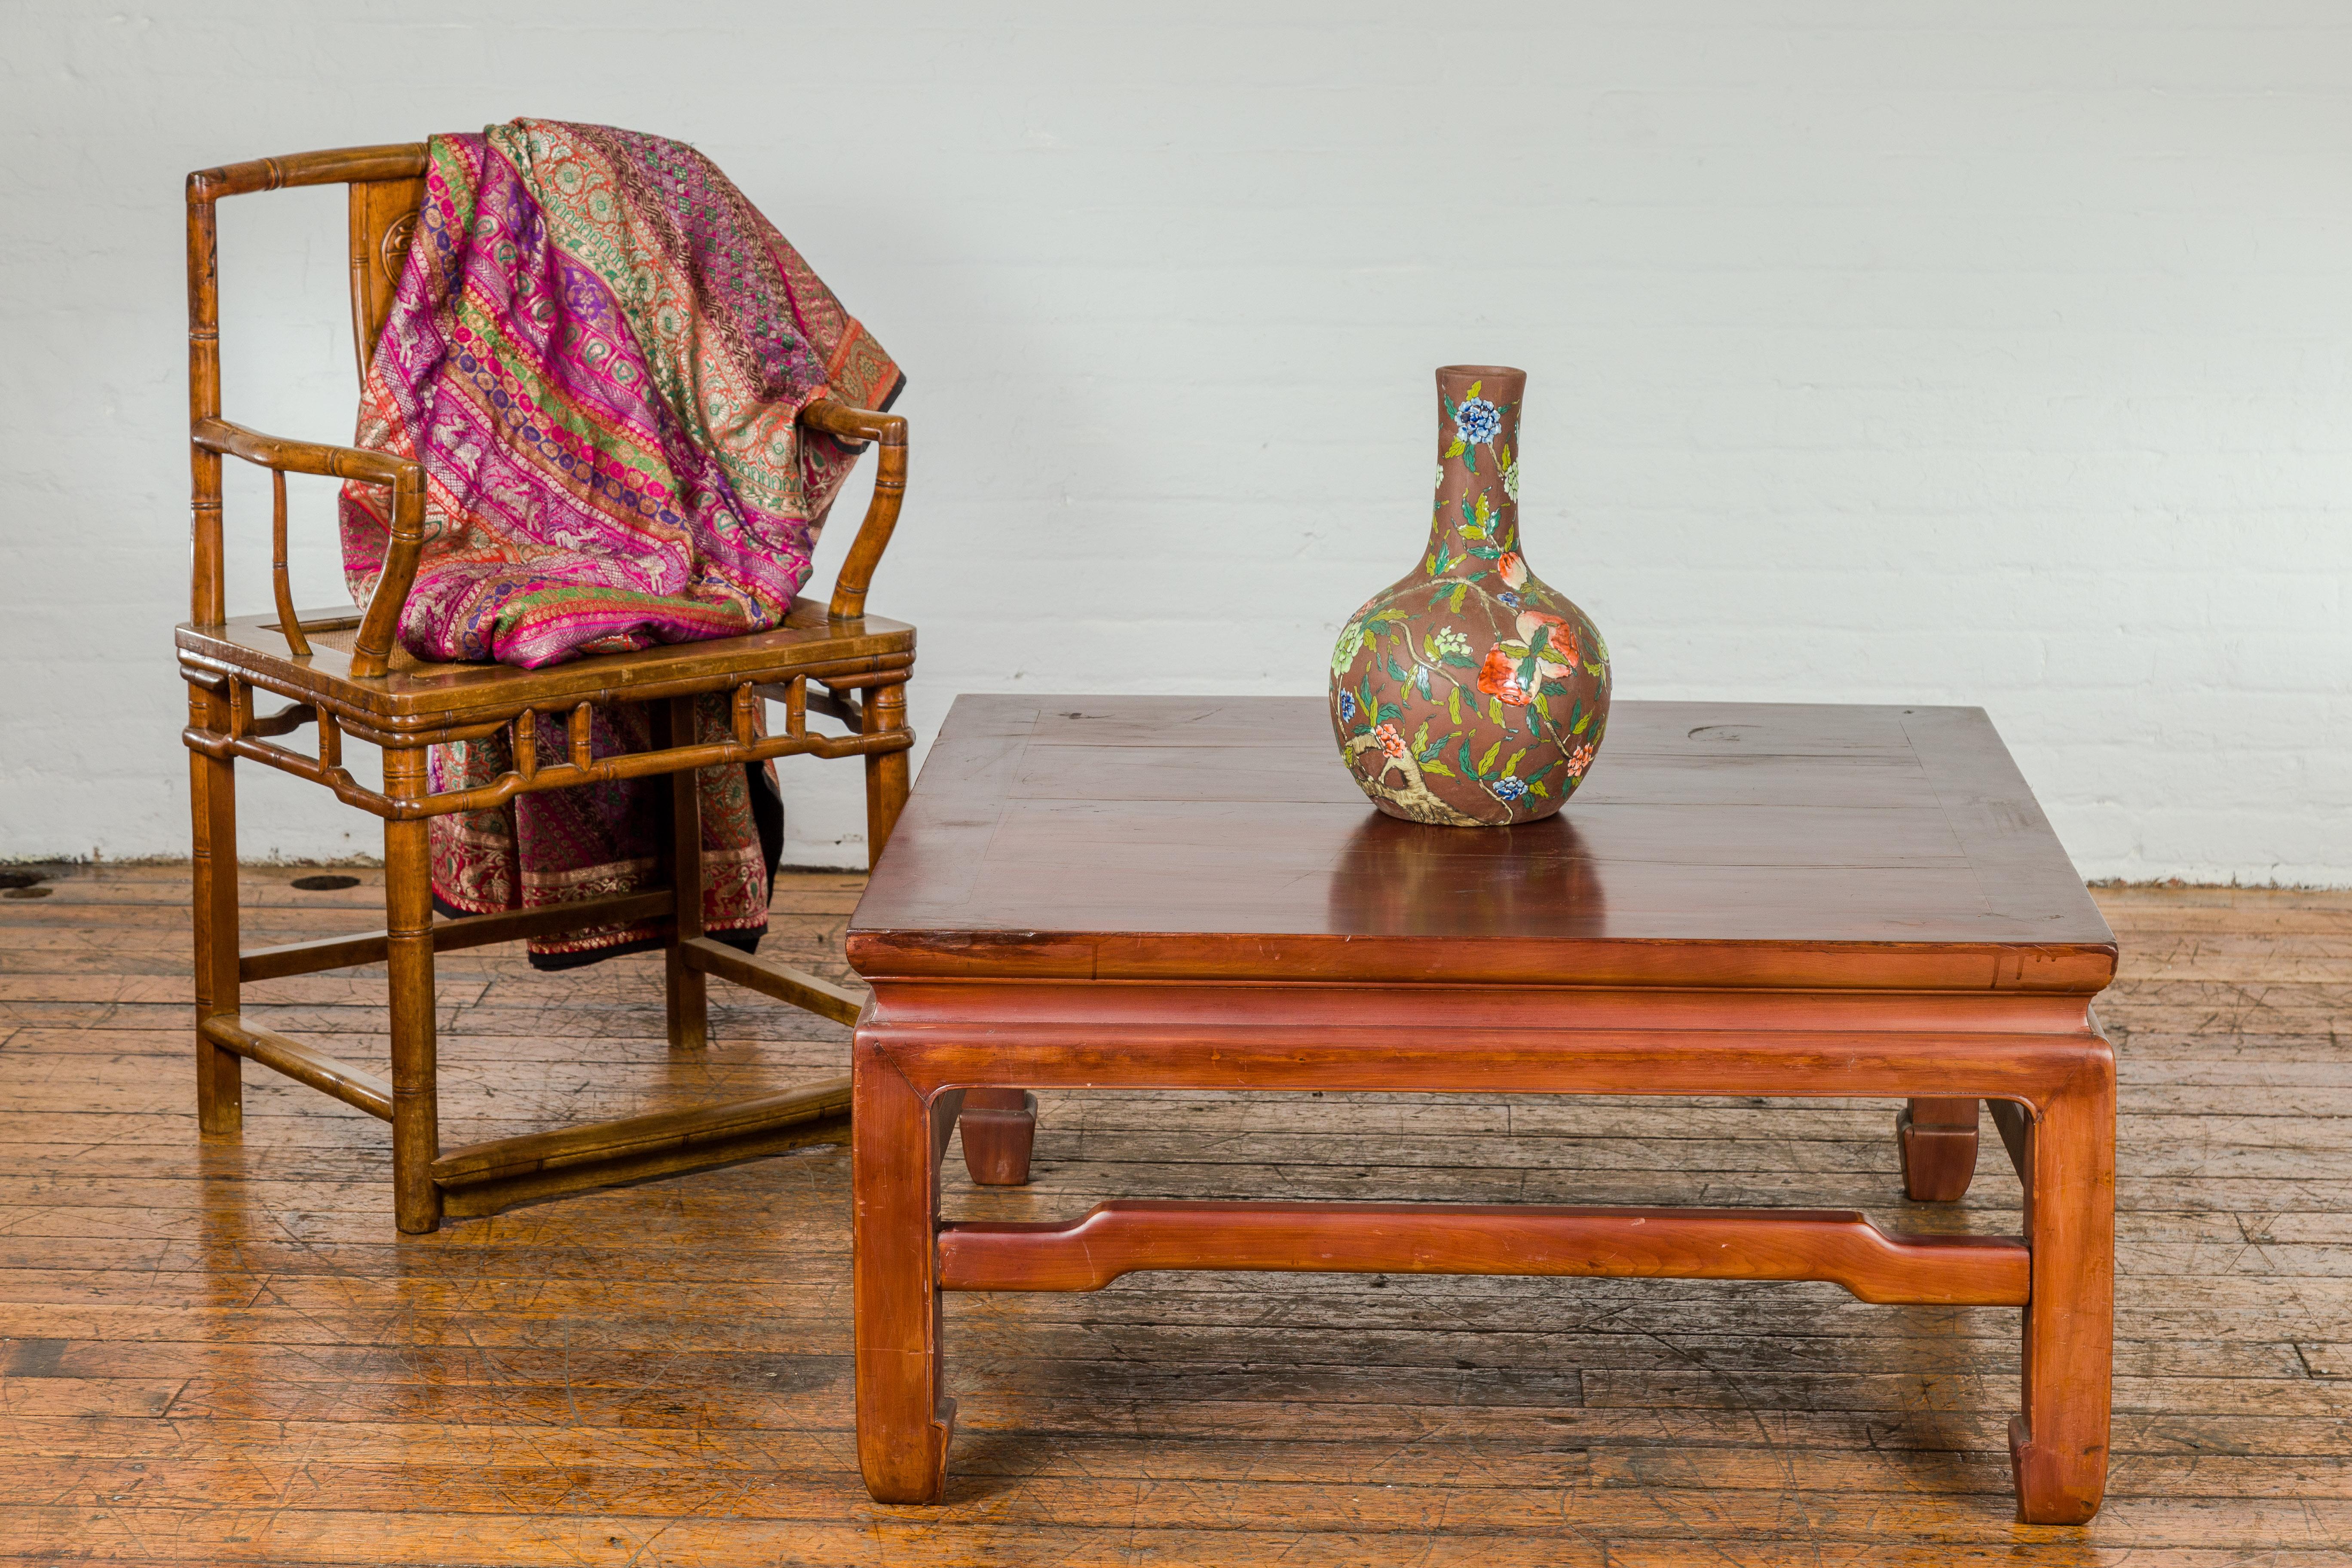 A late Qing Dynasty period square shaped coffee table from the early 20th century with humpback stretchers and horse hoof legs. This late Qing Dynasty period coffee table, dating from the early 20th century, is a remarkable artifact that beautifully